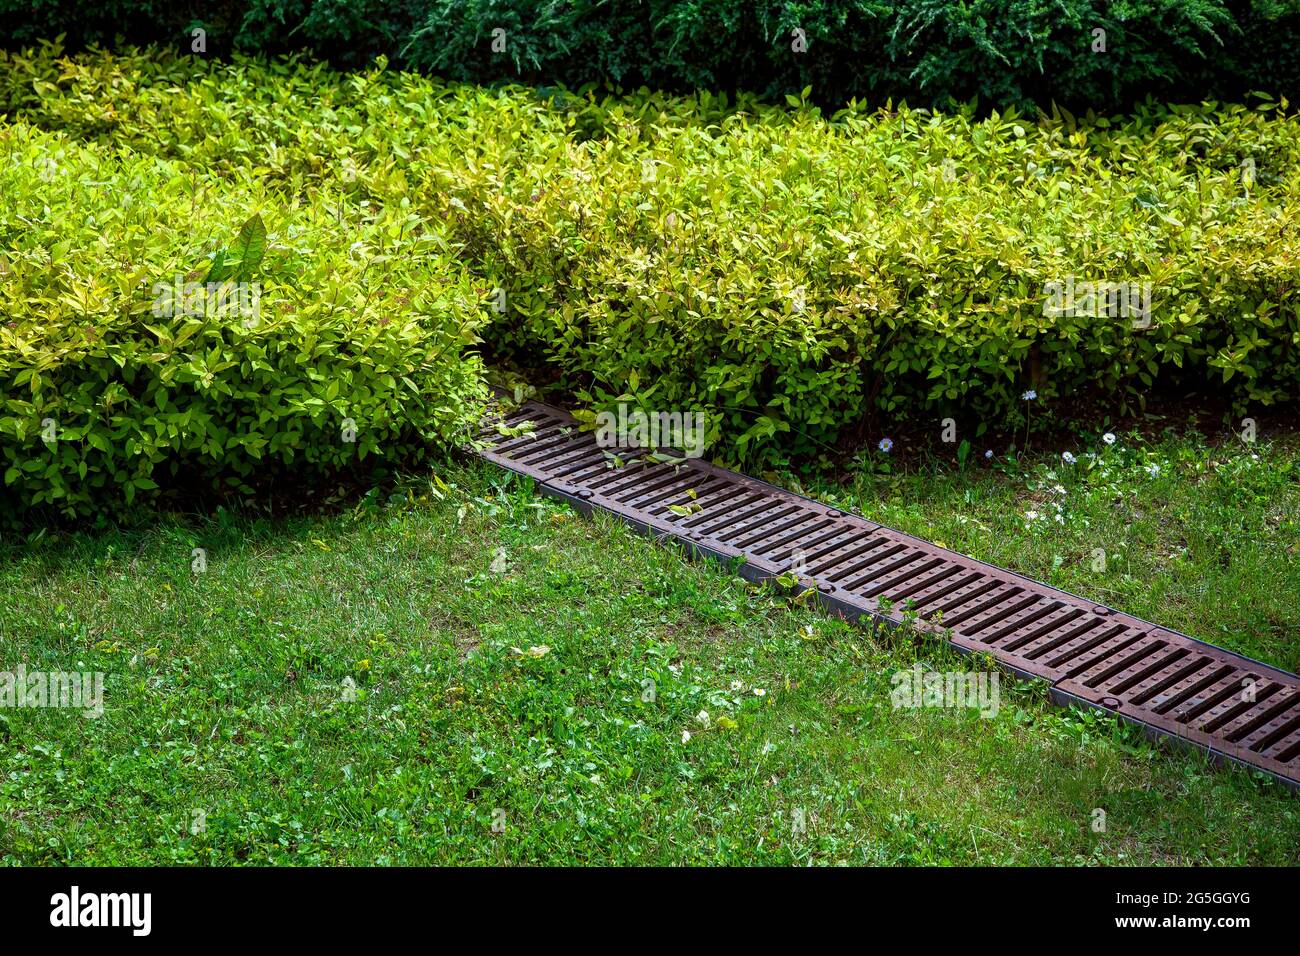 grate drainage system on the lawn with green grass and bushes in the backyard garden, rainwater drainage system in the park among the plants, nobody. Stock Photo